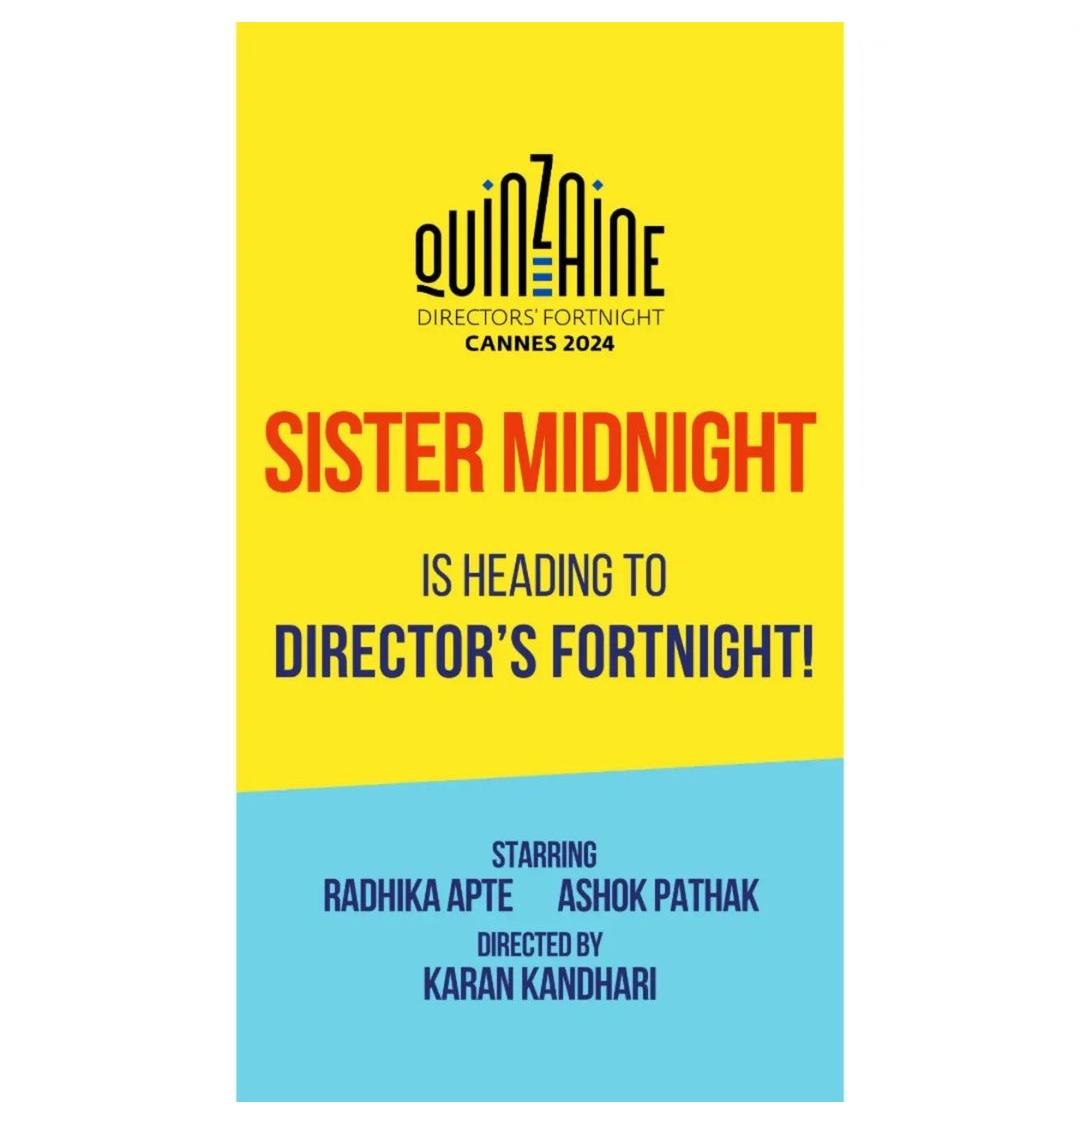 #SisterMidnight by #KaranKandhari, ft. @radhika_apte & #AshokPathak to have its World Premiere at the Cannes Film Festival 2024 in the @Quinzaine Section (Directors’ Fortnight).

@WellingtonFilms @GriffinPicsLtd @suitablepic @protagonistpics
@Film4Production @BFI